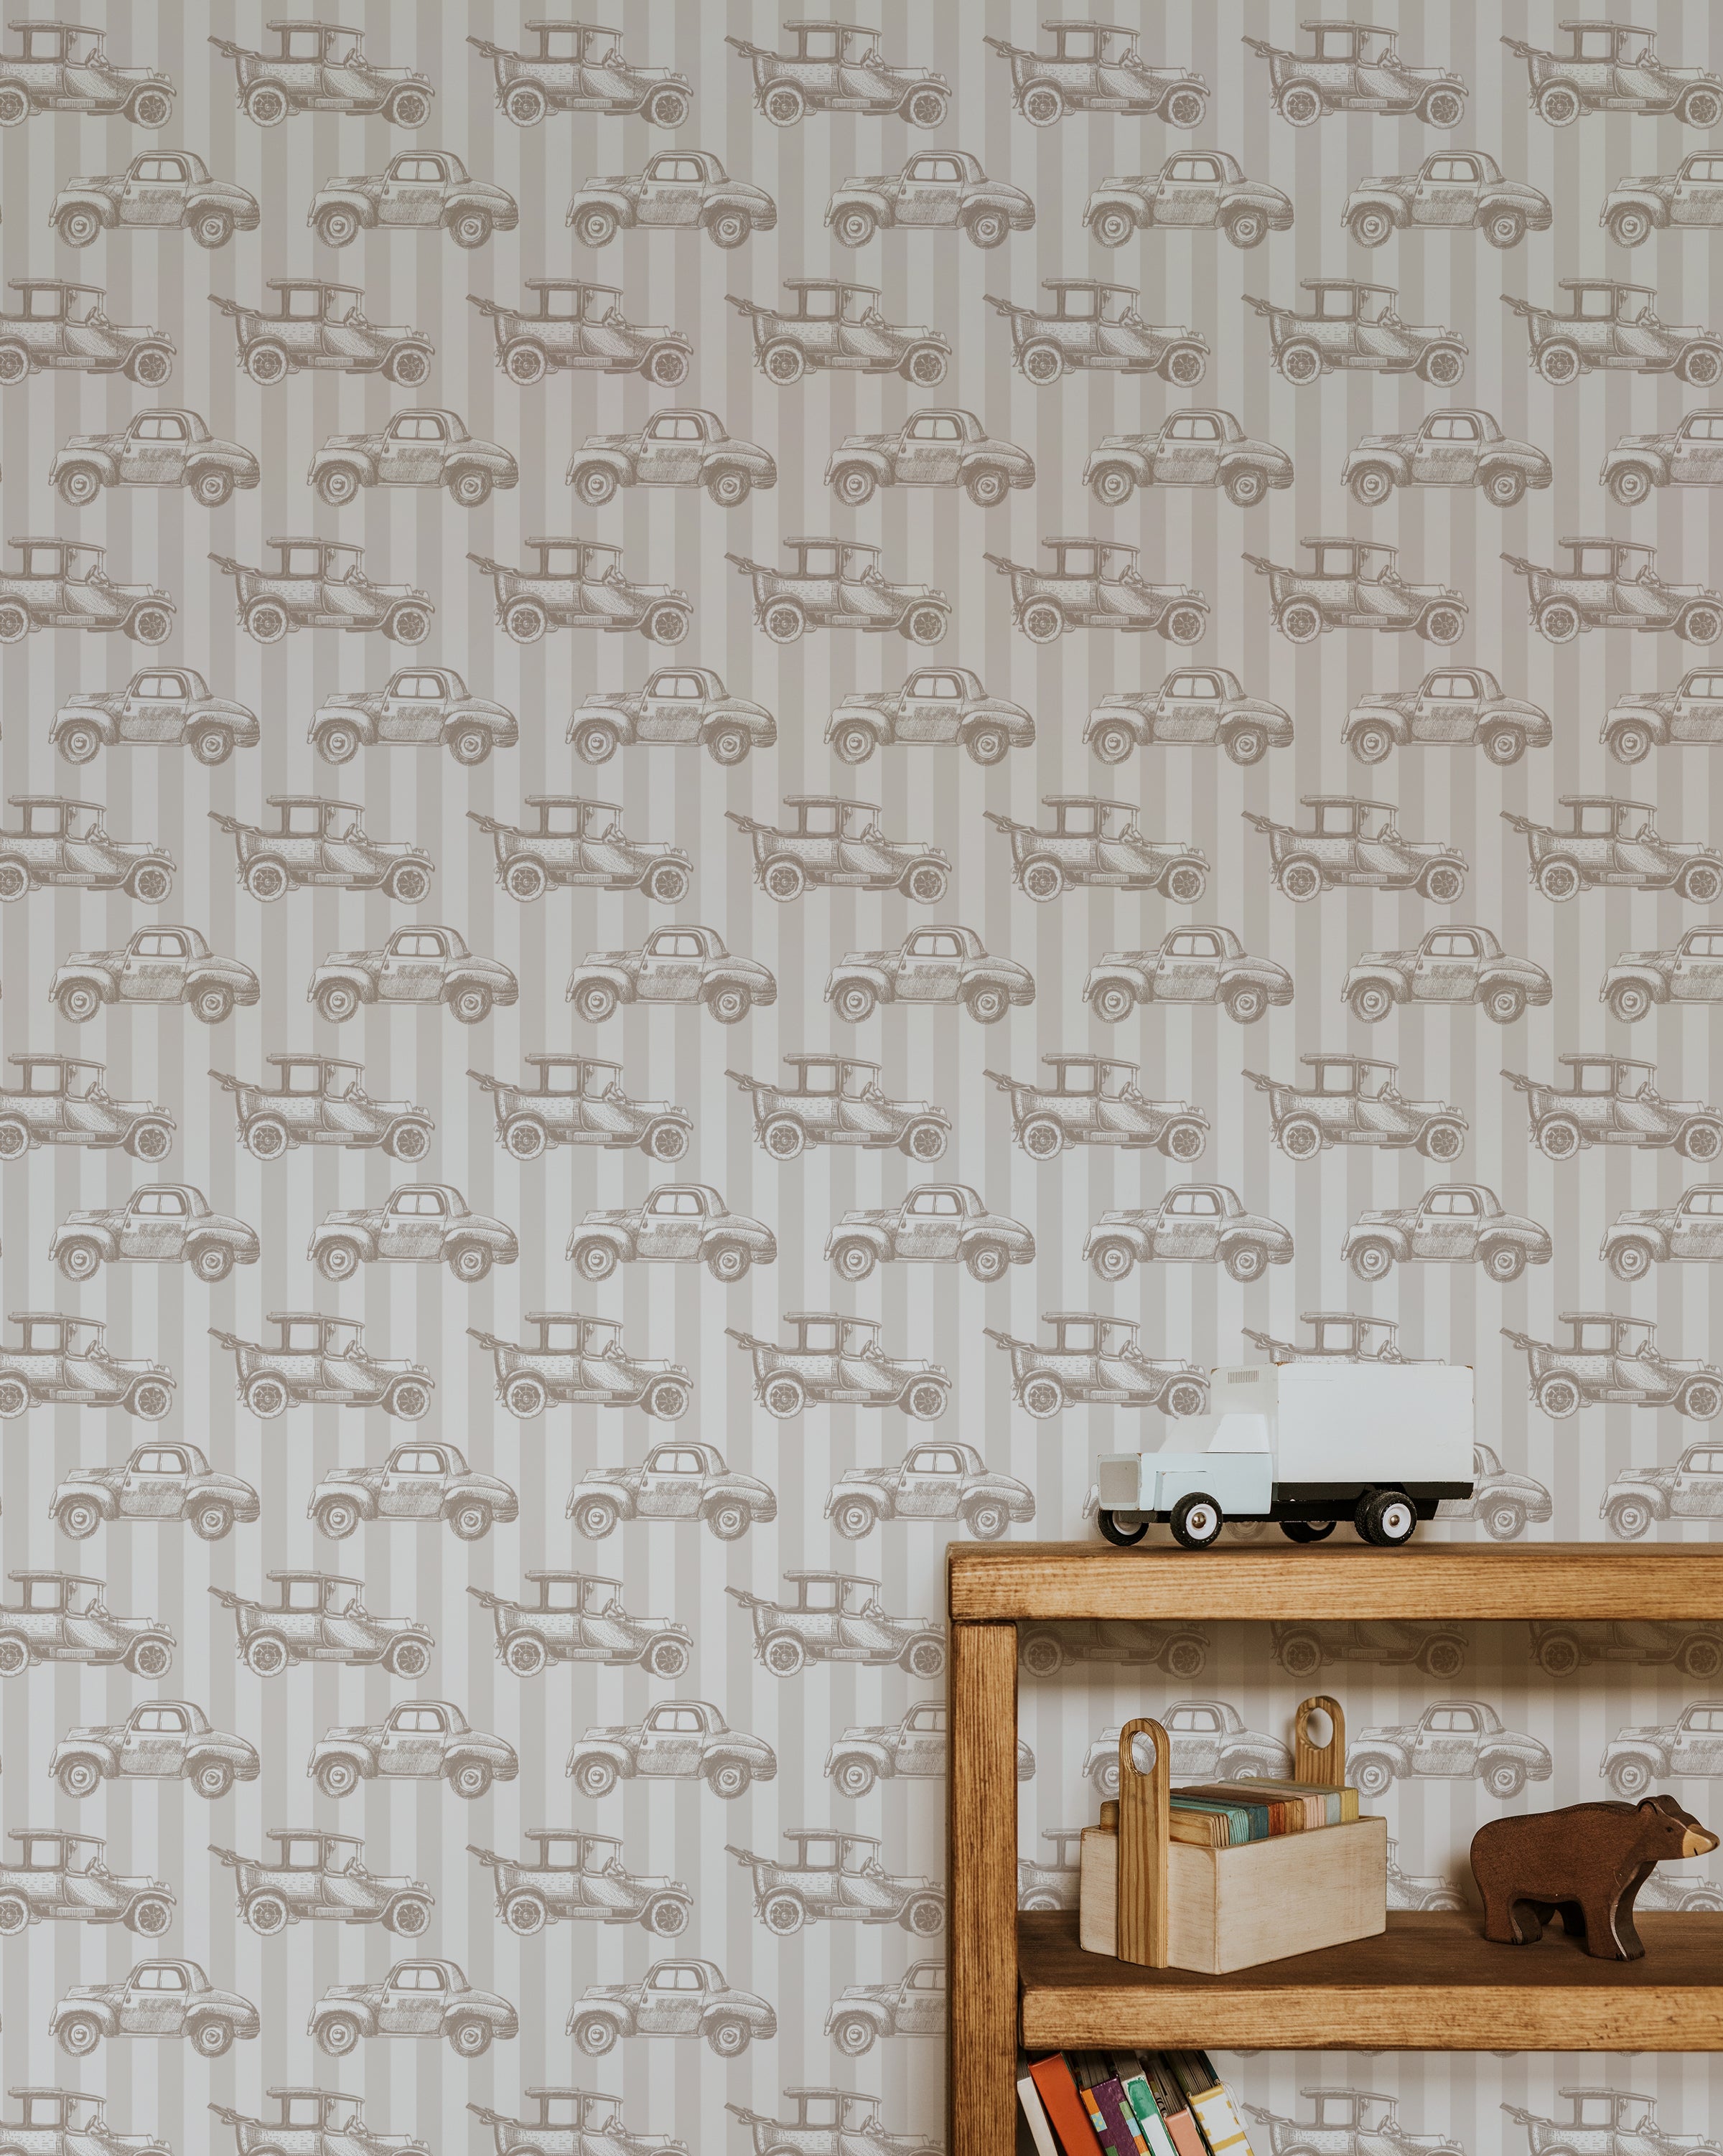 A full view of a wall covered with Antique Auto Wallpaper in beige. The design features intricate illustrations of classic cars, creating a nostalgic and vintage ambiance. A wooden shelf with toys and books is positioned against the wall.